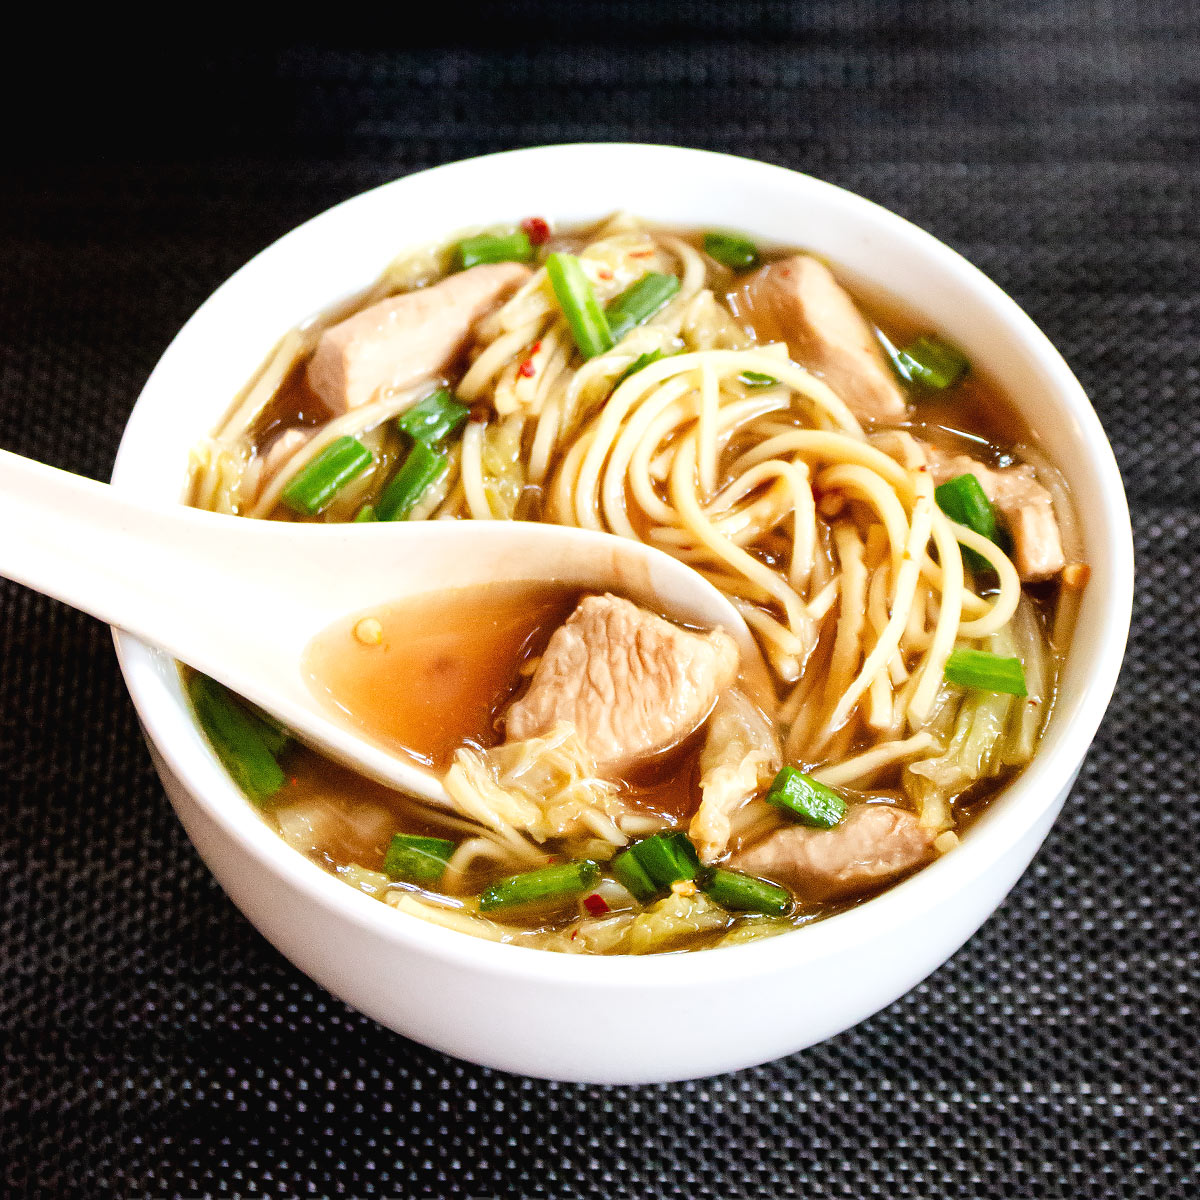 One-Pot Chinese Chicken Noodle Soup Recipe 🍜 